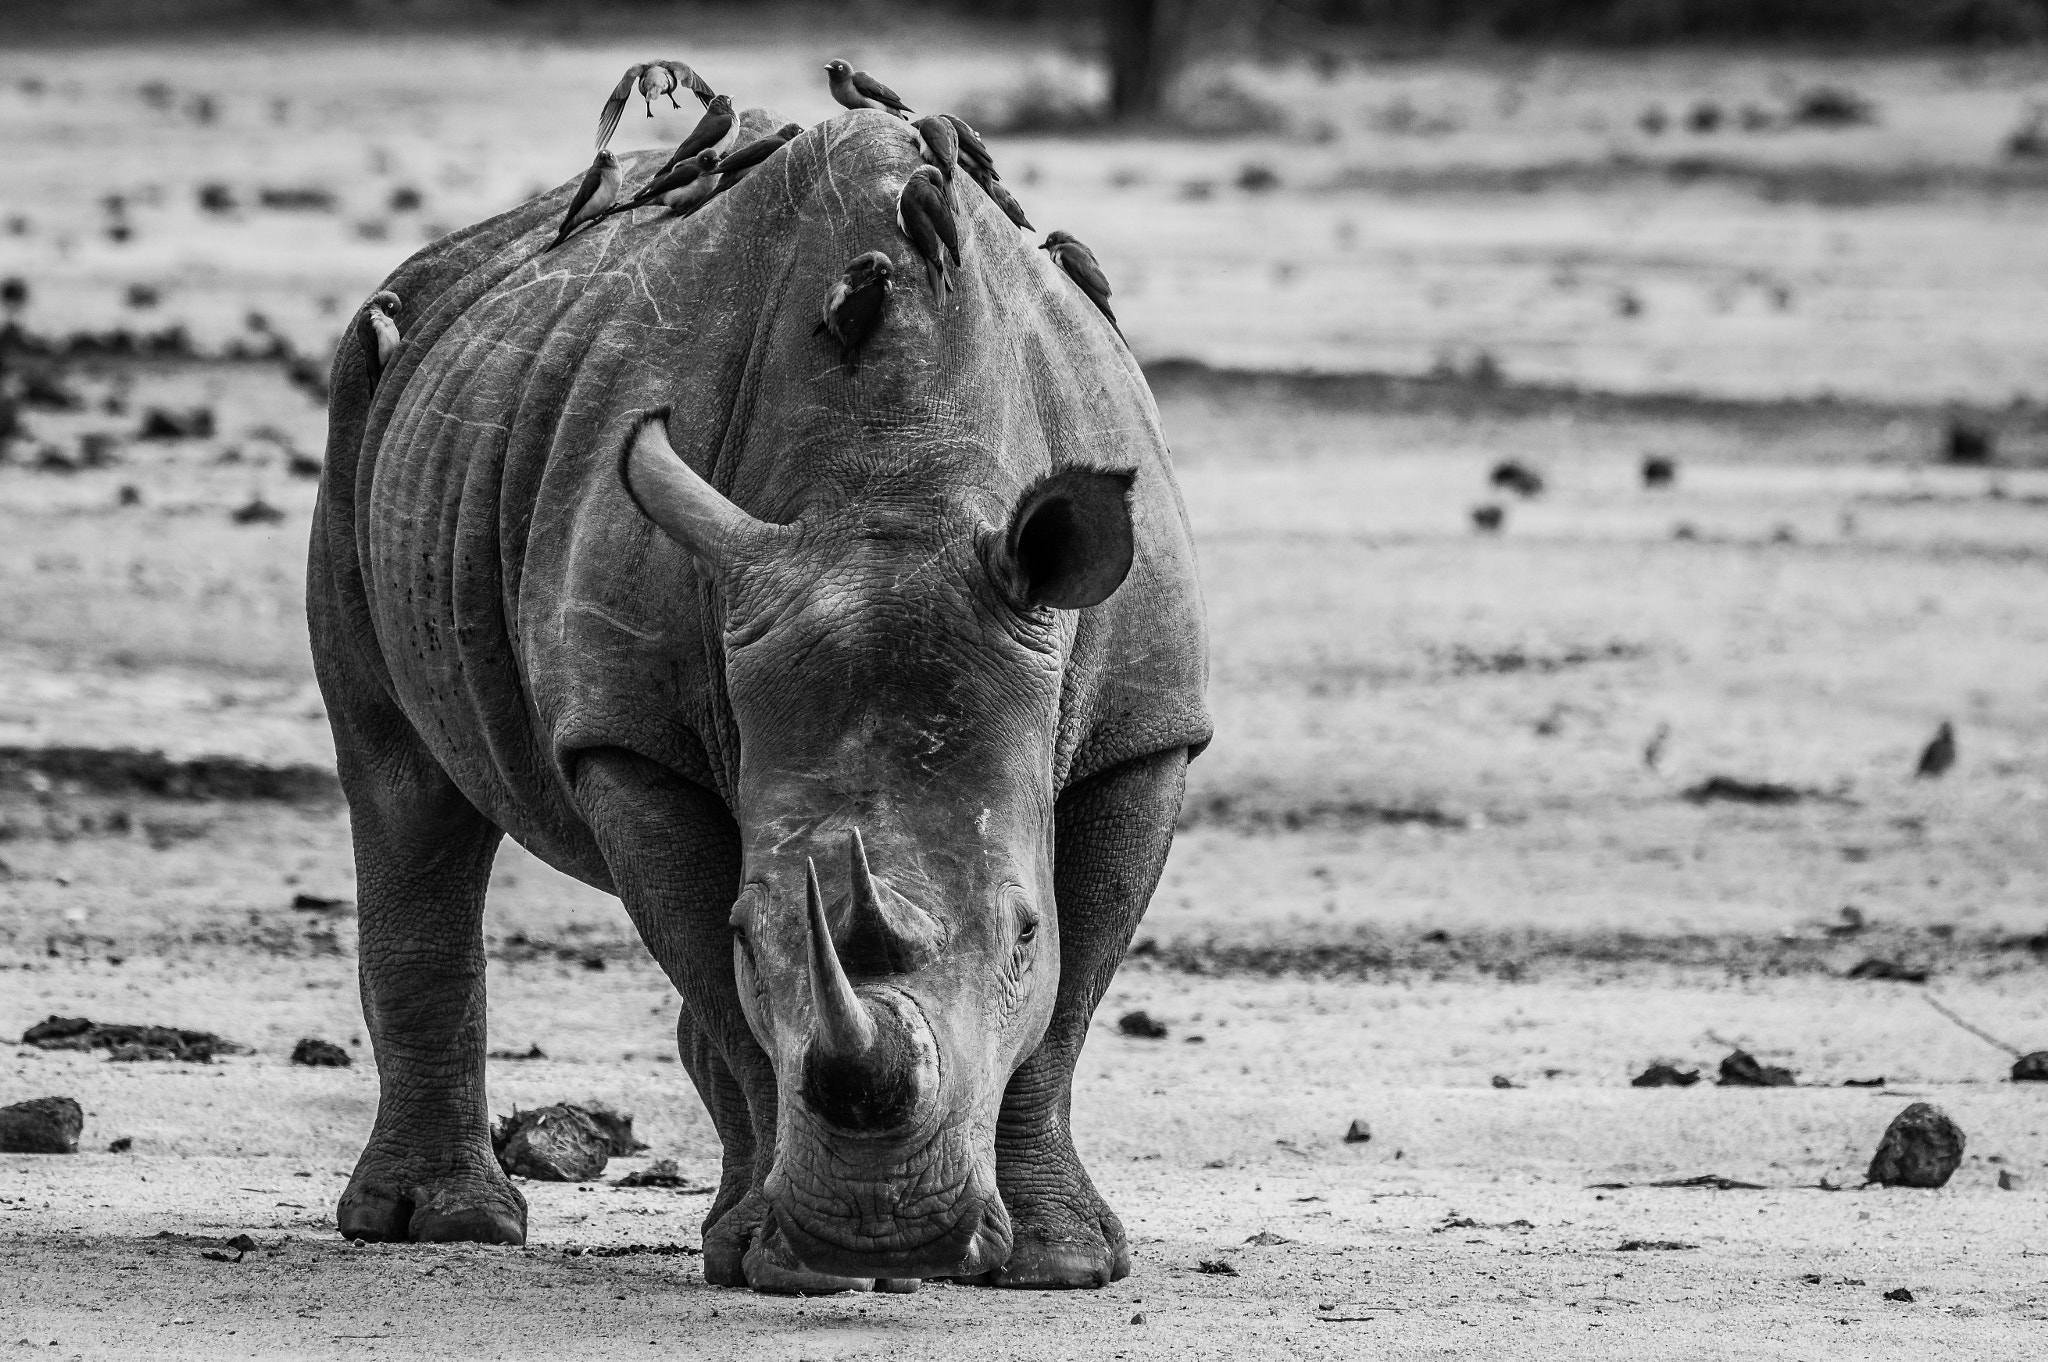 Pentax K-3 sample photo. Grim rhino with oxpeckers photography